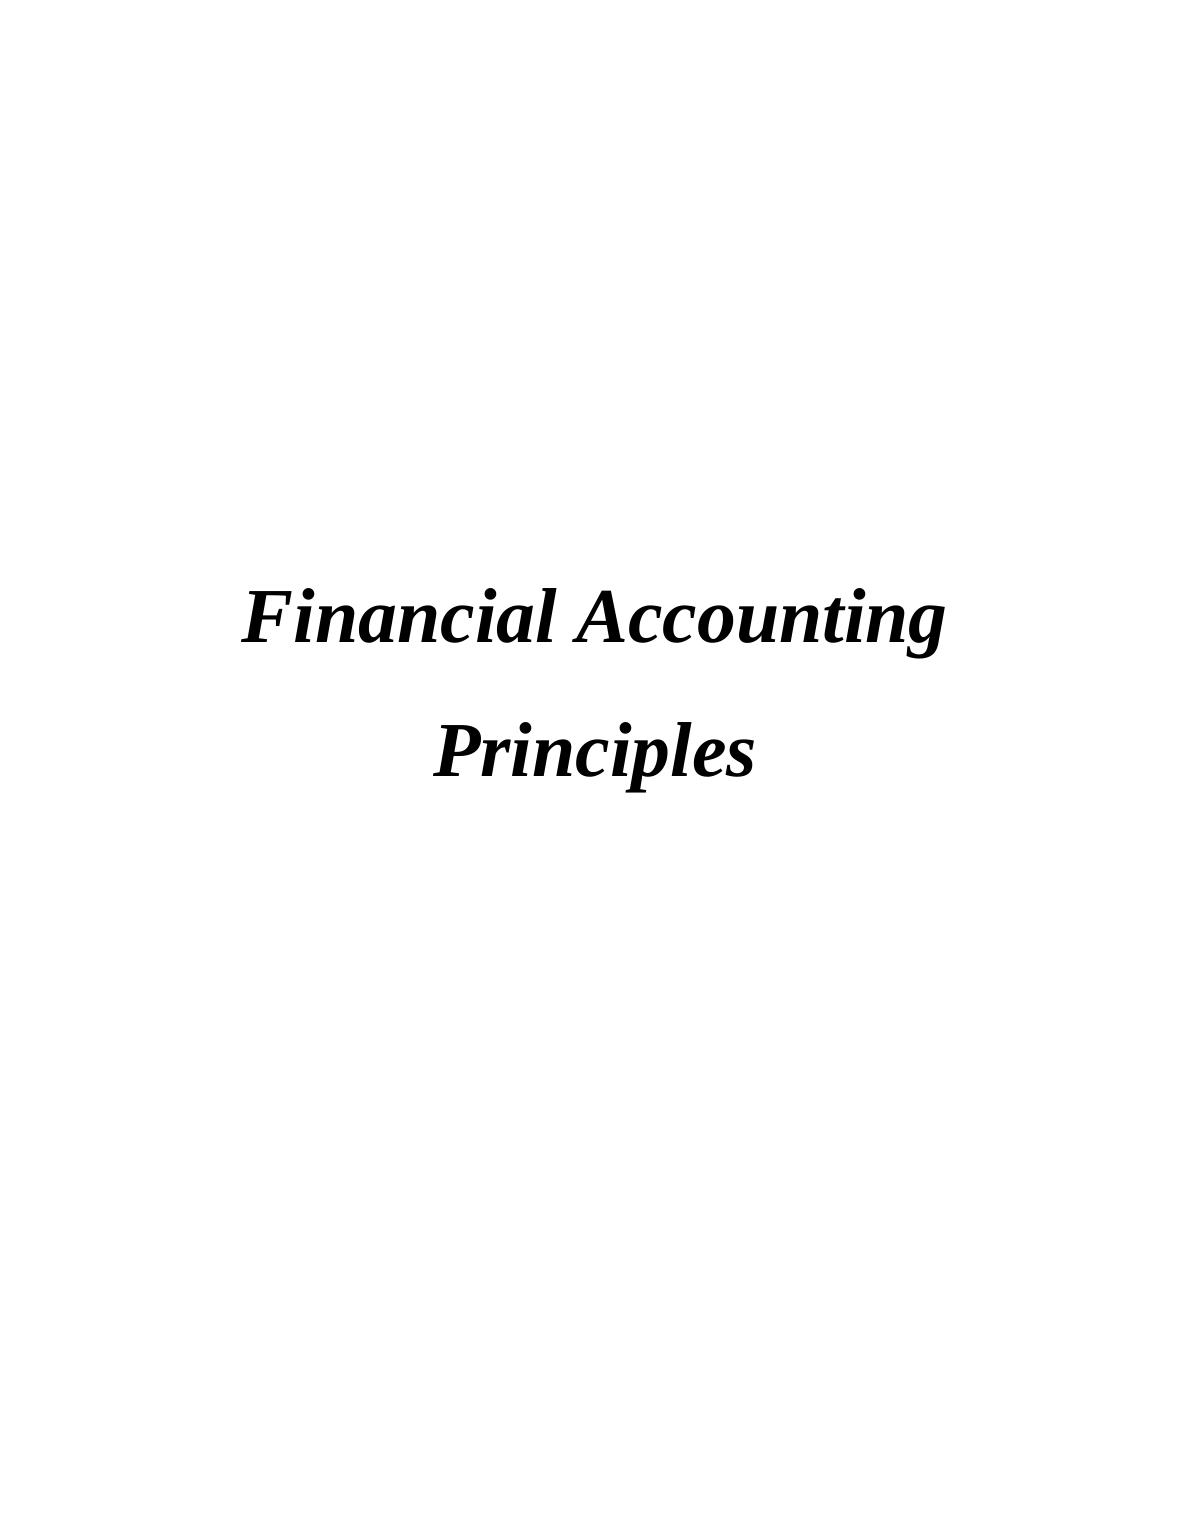 Financial Accounting Principles Assignment - Doc_1